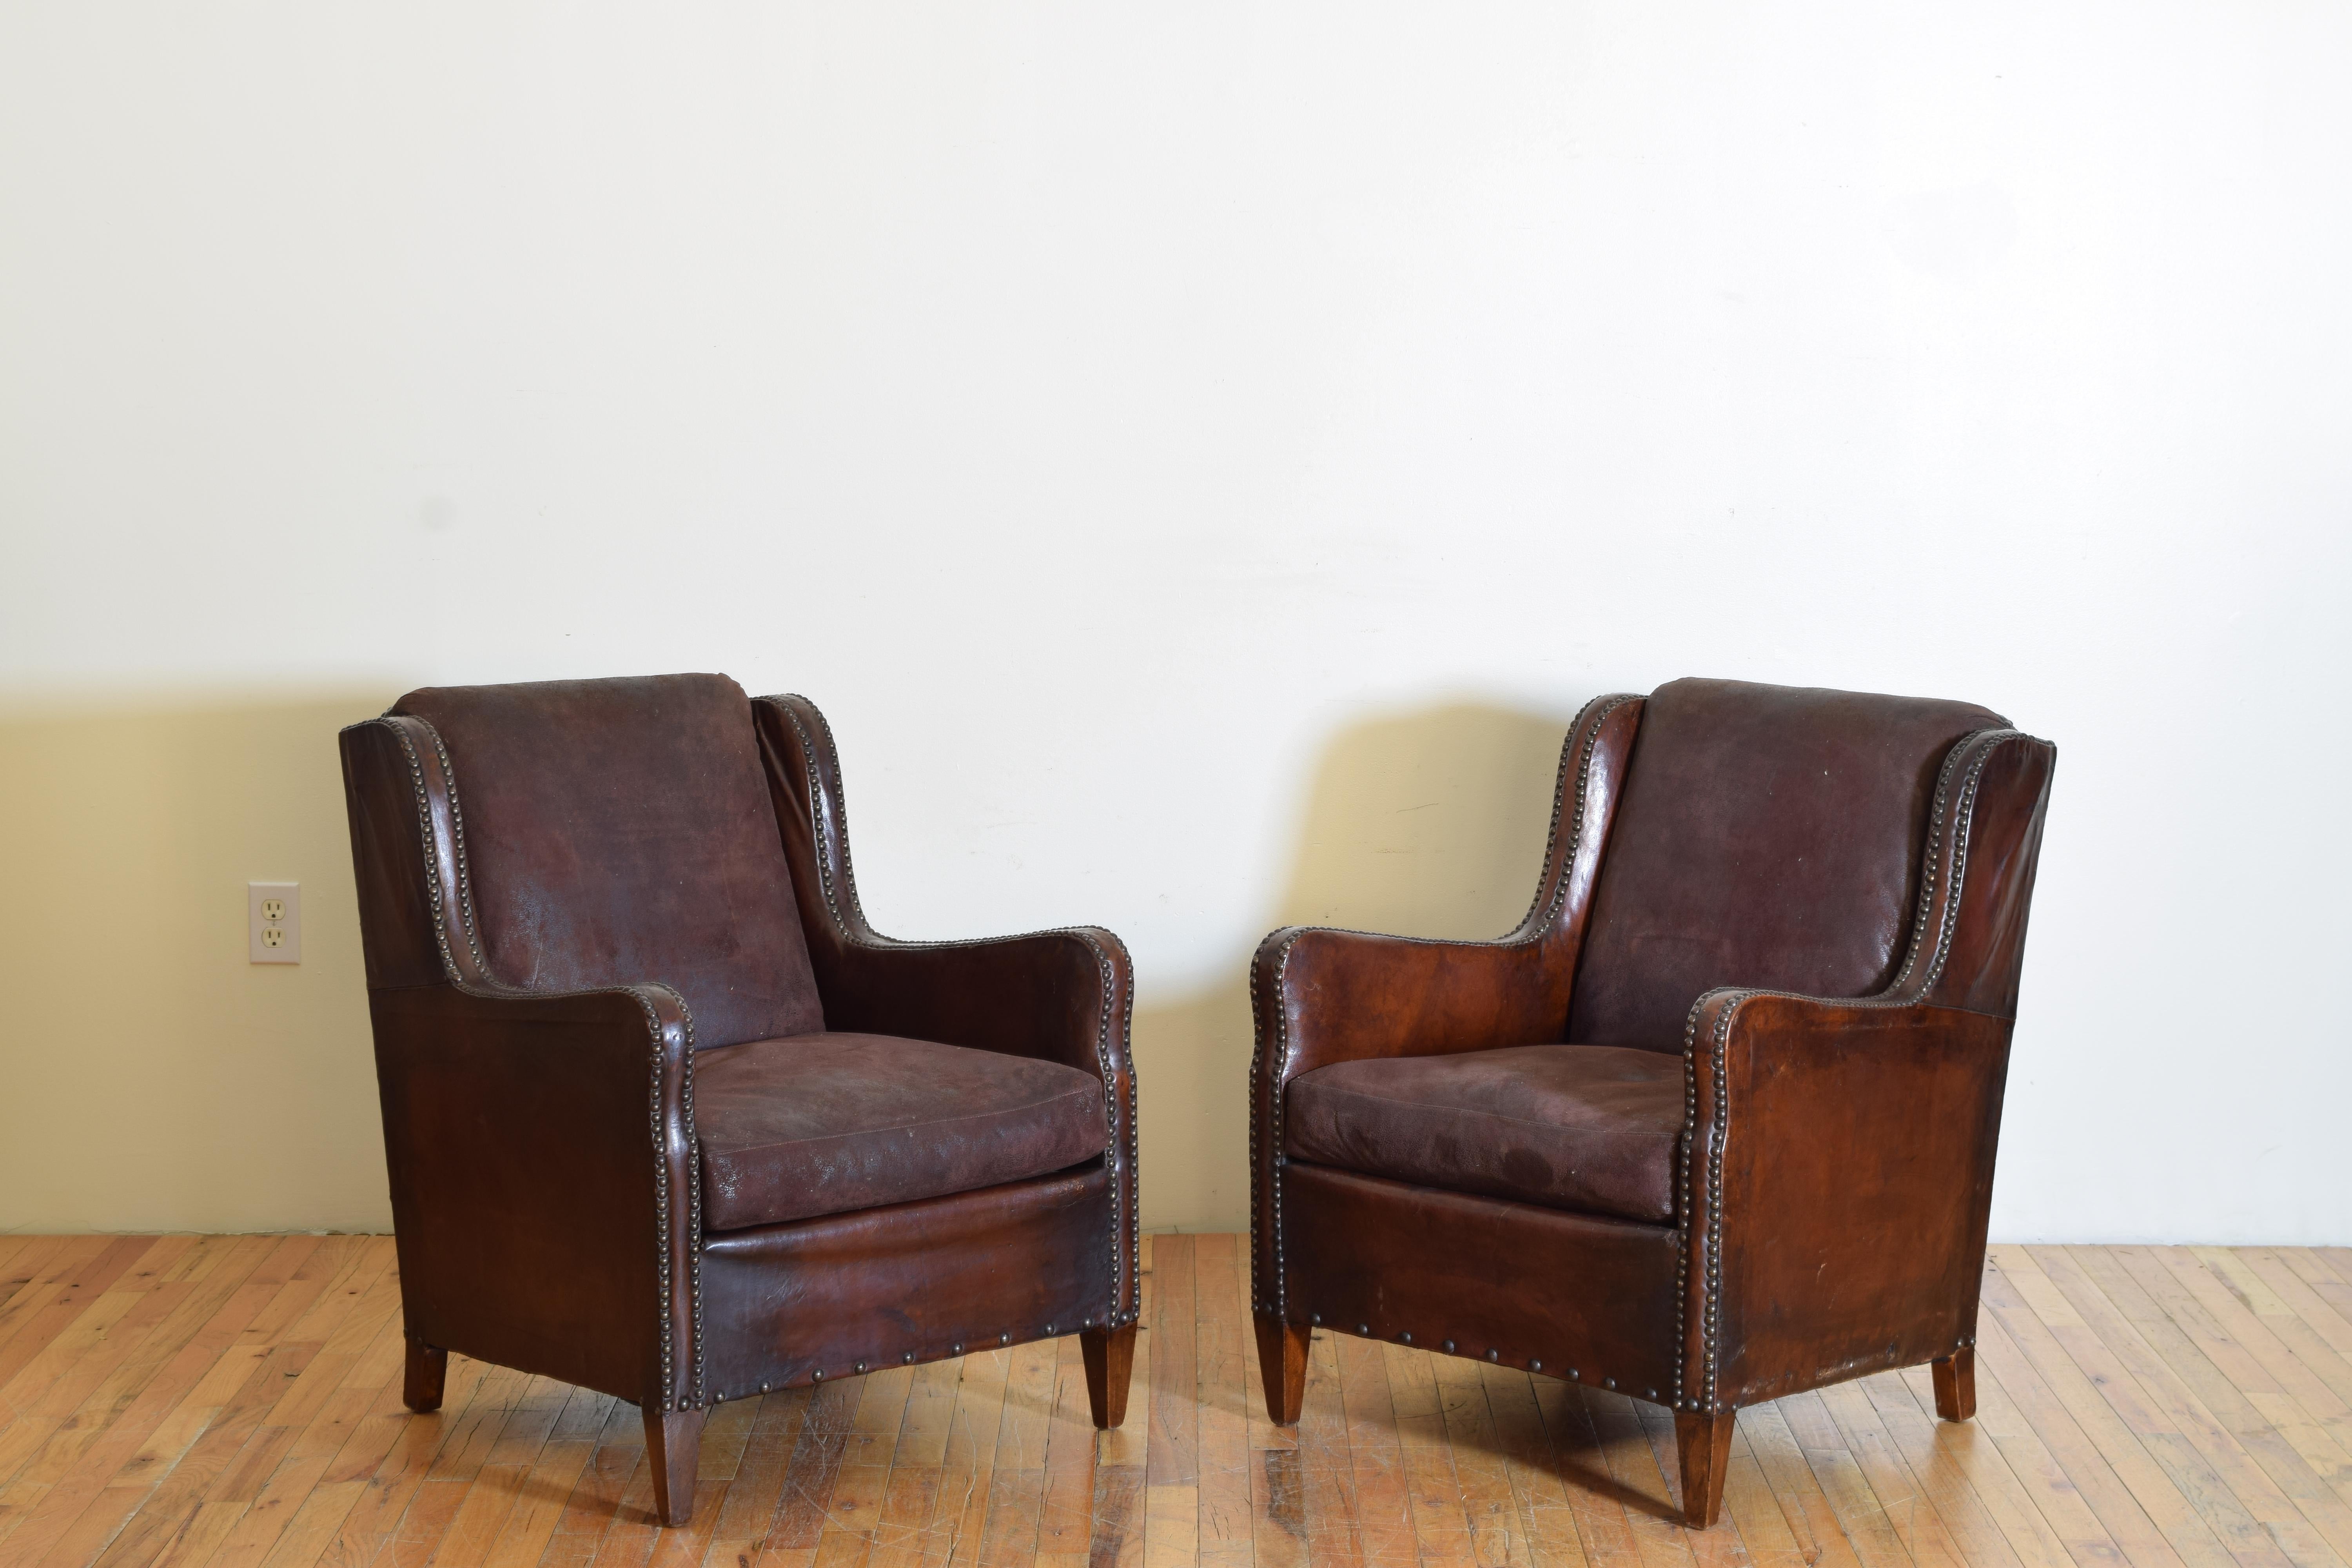 Upholstered in leather with patinated brass nailhead trim these handsome and beautifully shaped chairs feature shaped sides with slightly ascending arms, the seat and backrests upholstered in complimentary suede, raised on square tapering walnut legs